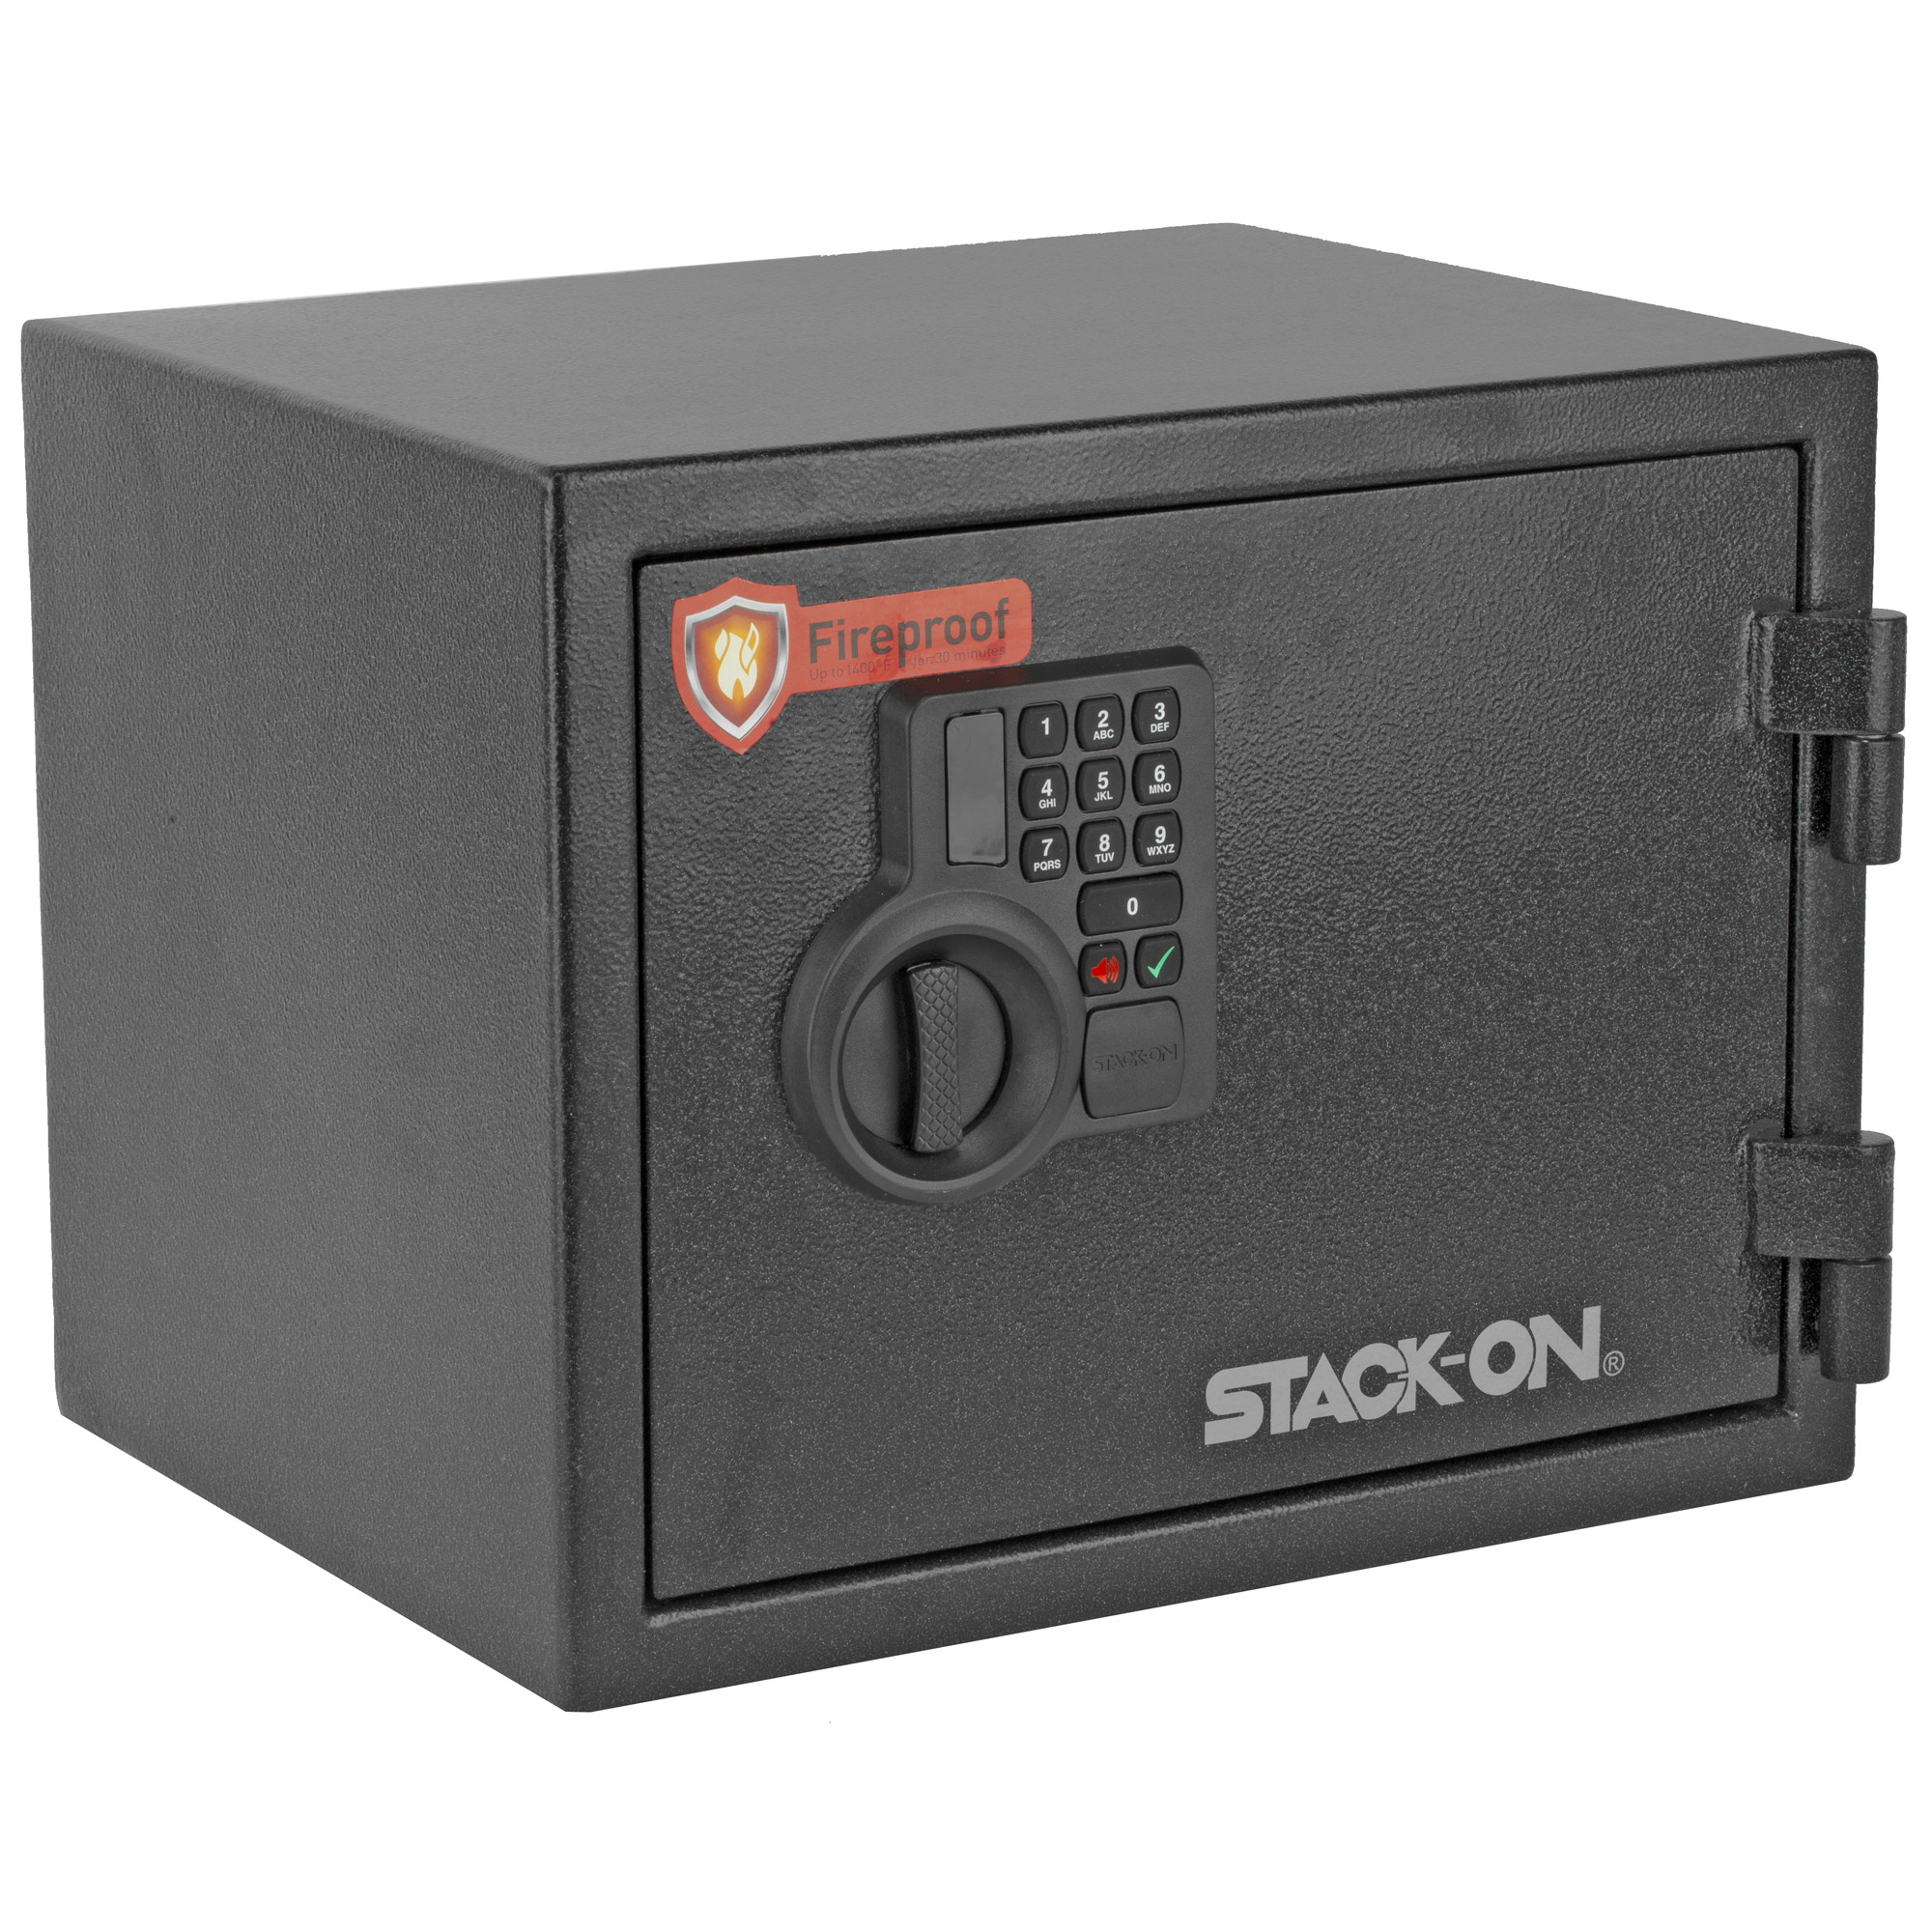 Stack-on Personal Fire Safe .8 Cu Ft